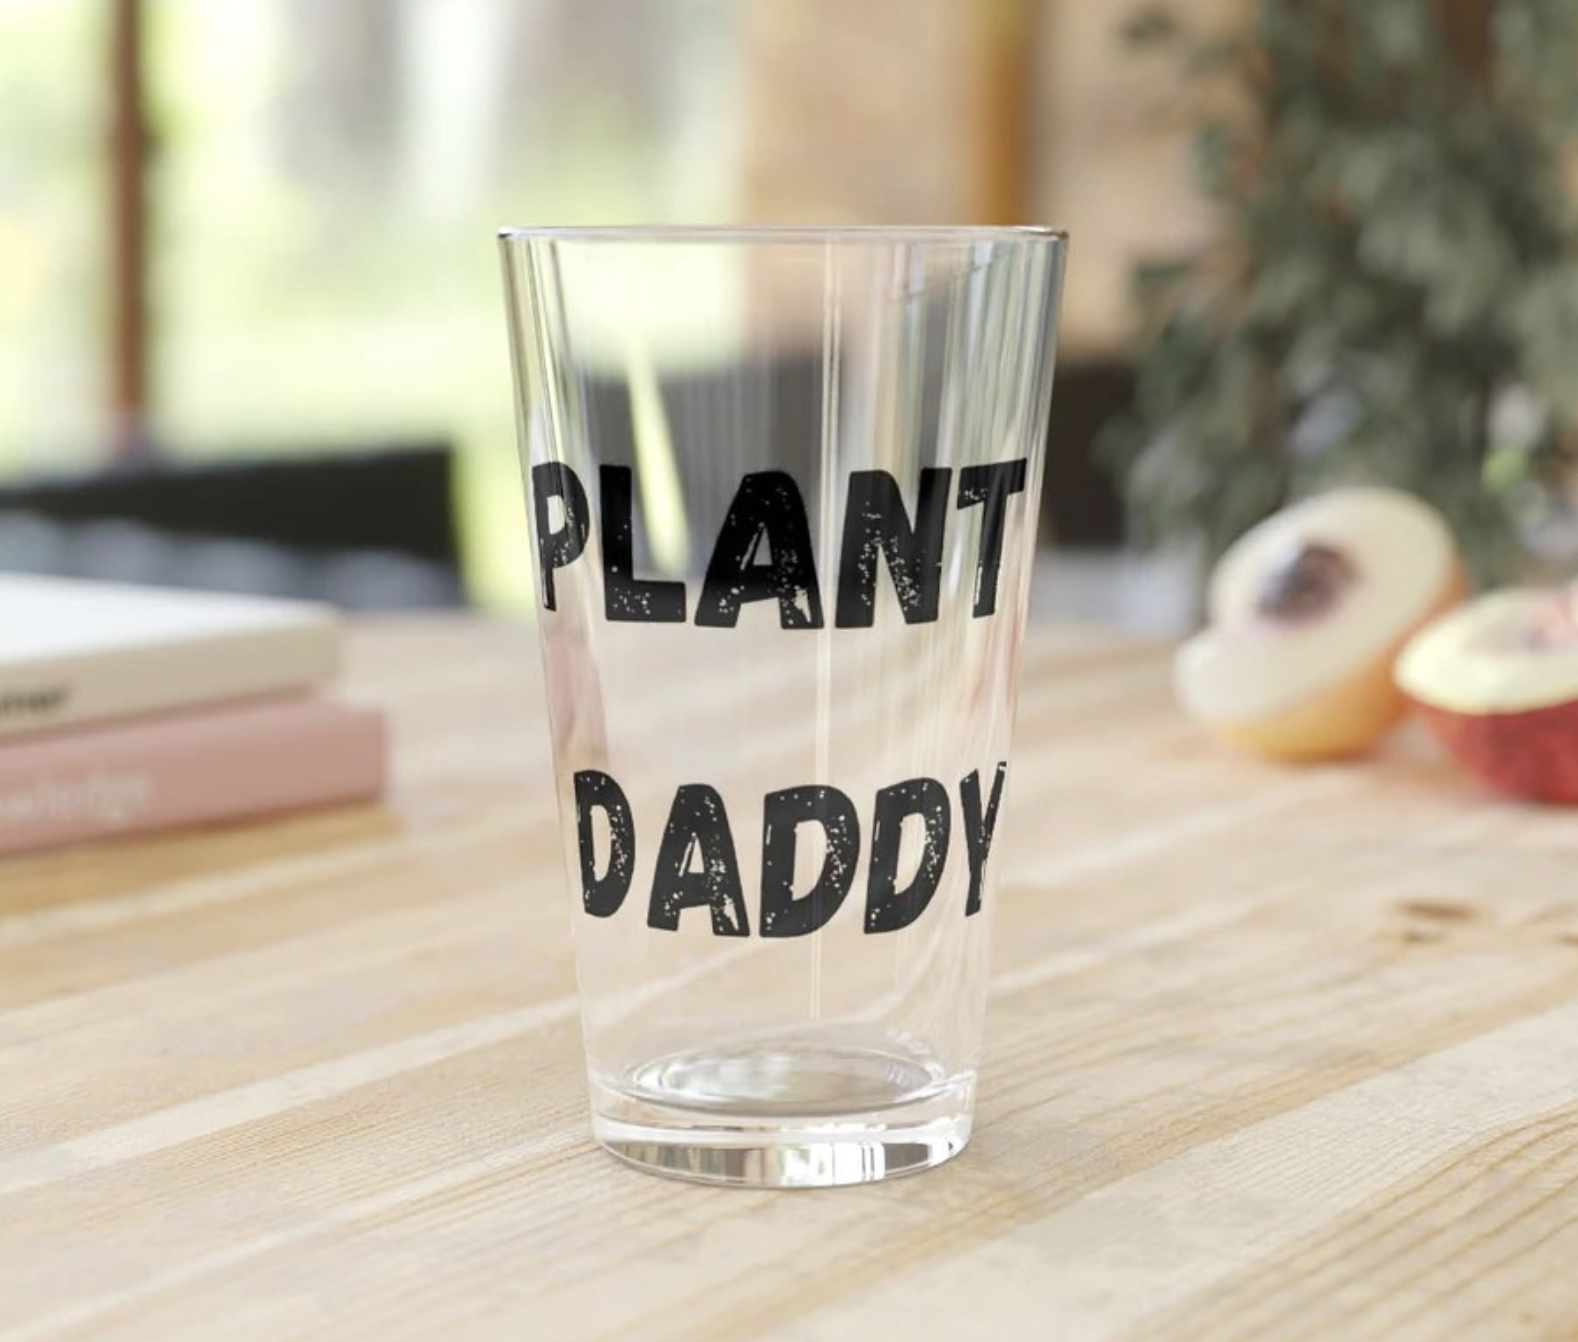 The Leafy Branch has a great selection of plant merchandise along with its plants. Photo: Courtesy The Leafy Branch / Instagram Black Plant Entrepreneurs